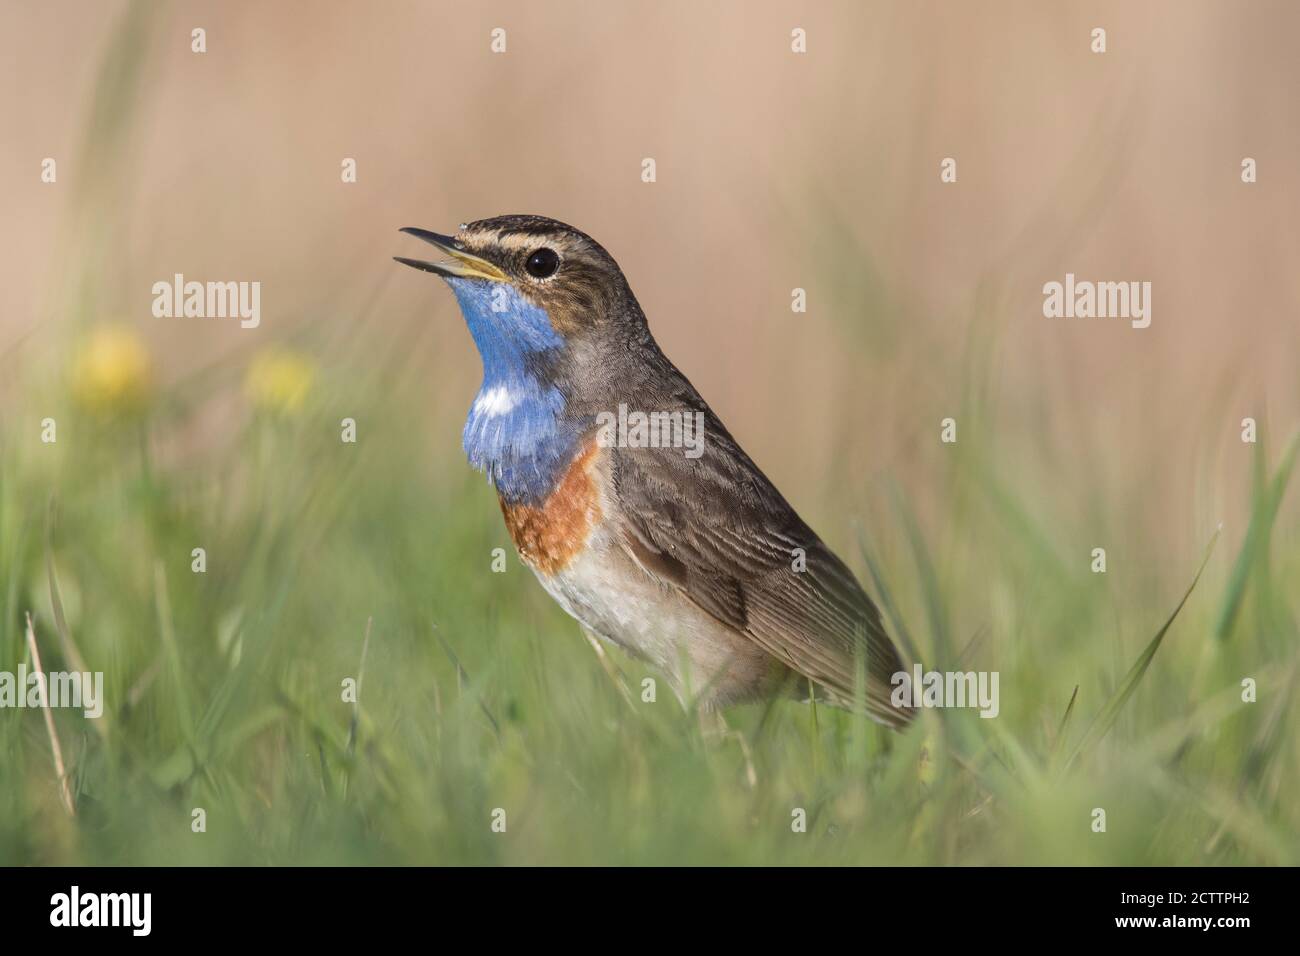 White-spotted Bluethroat (Luscinia svecica cyanecula). Adult male singing while standing on the ground. Stock Photo